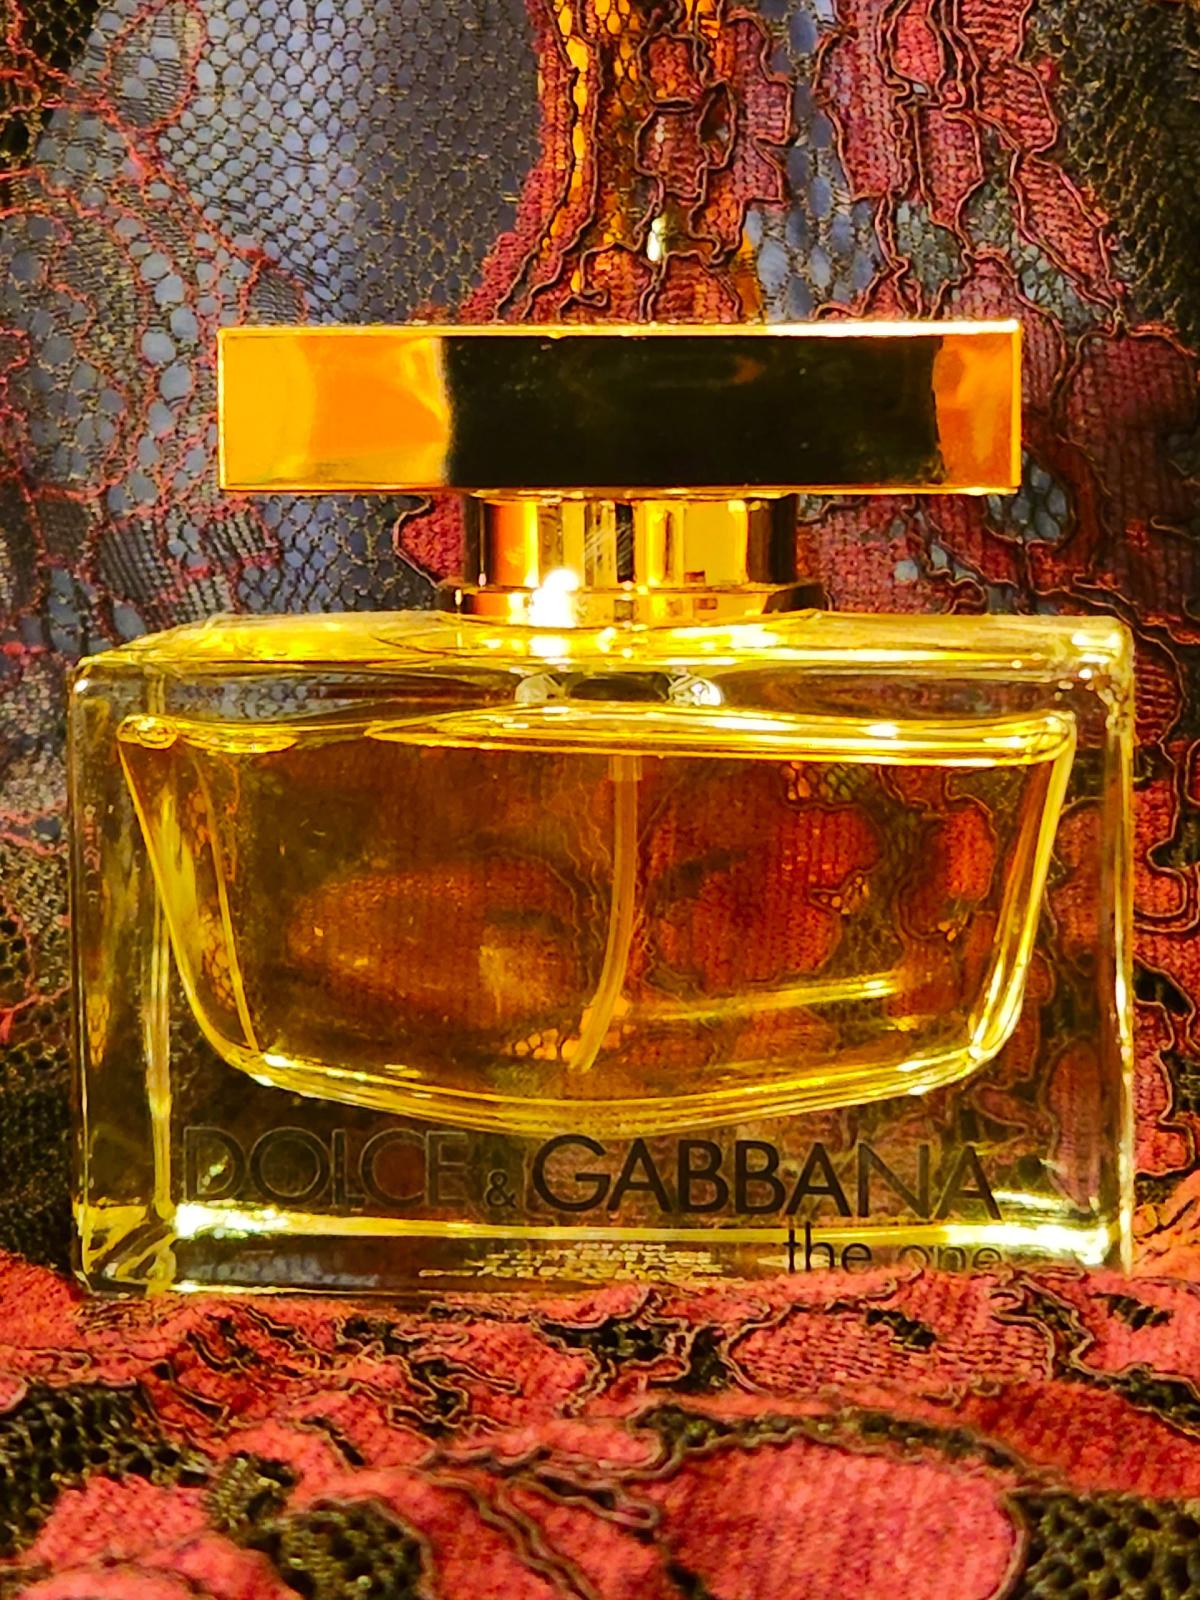 The One Dolce&Gabbana perfume - a fragrance for women 2006